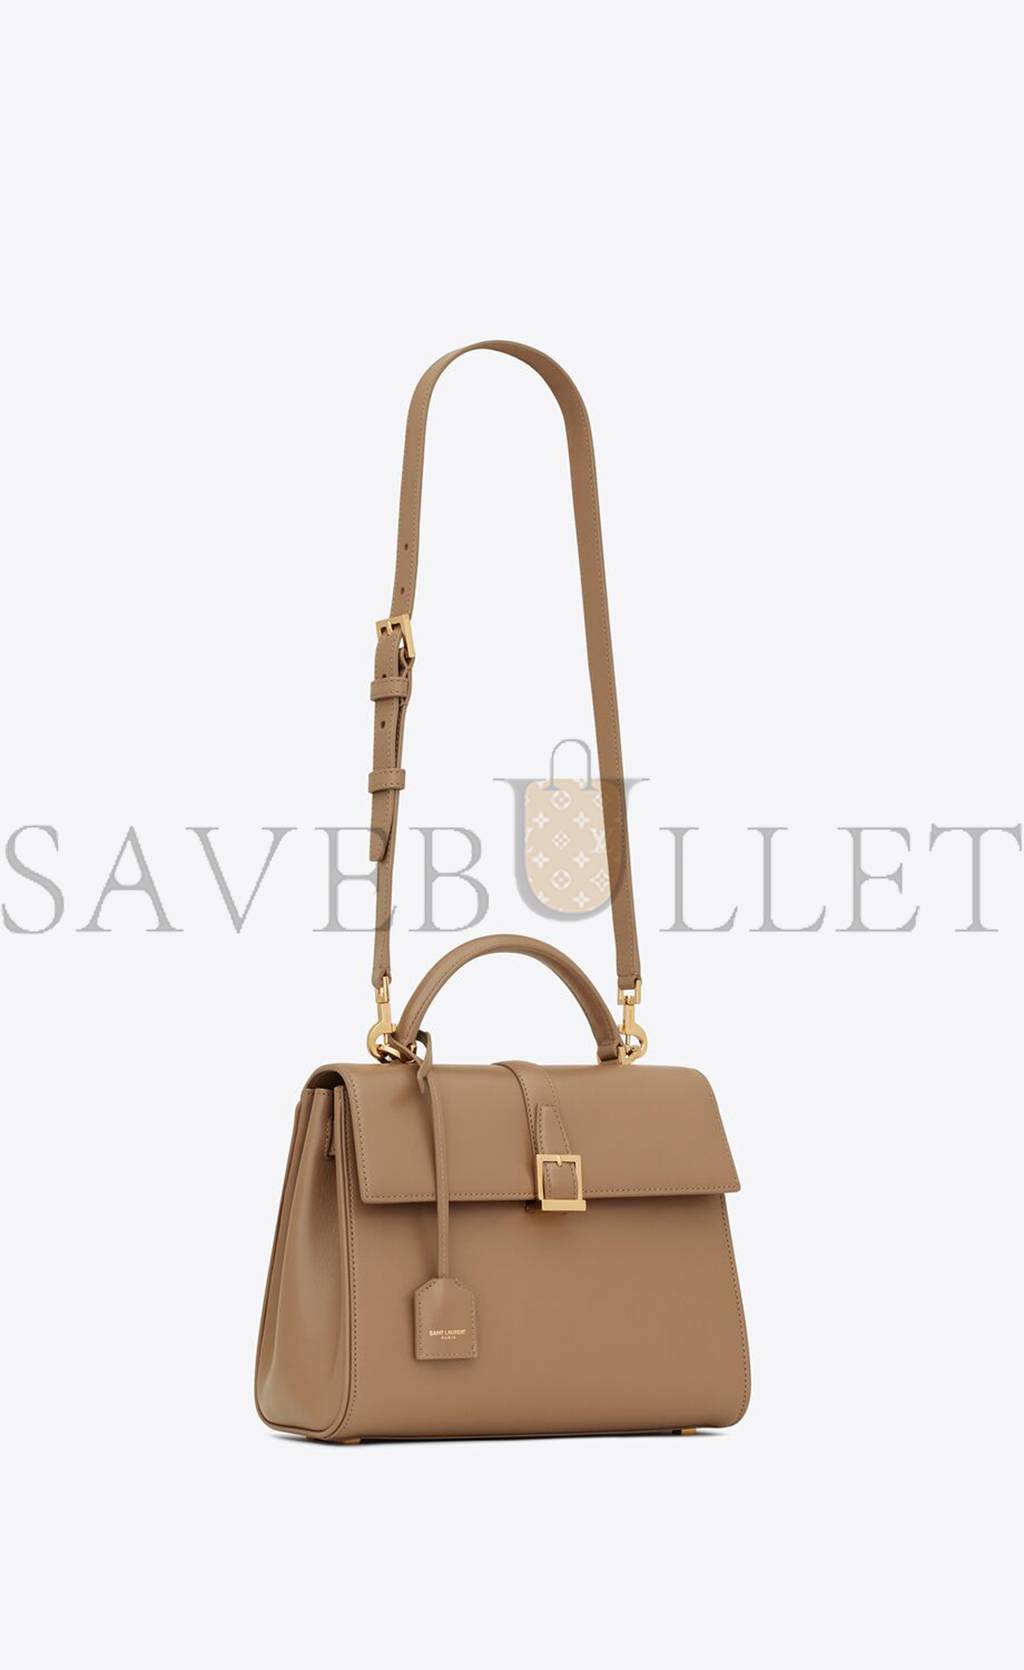 YSL LE FERMOIR SMALL TOP HANDLE BAG IN SHINY LEATHER 6869822ZA0J2346 (25*19.5*10.5cm)